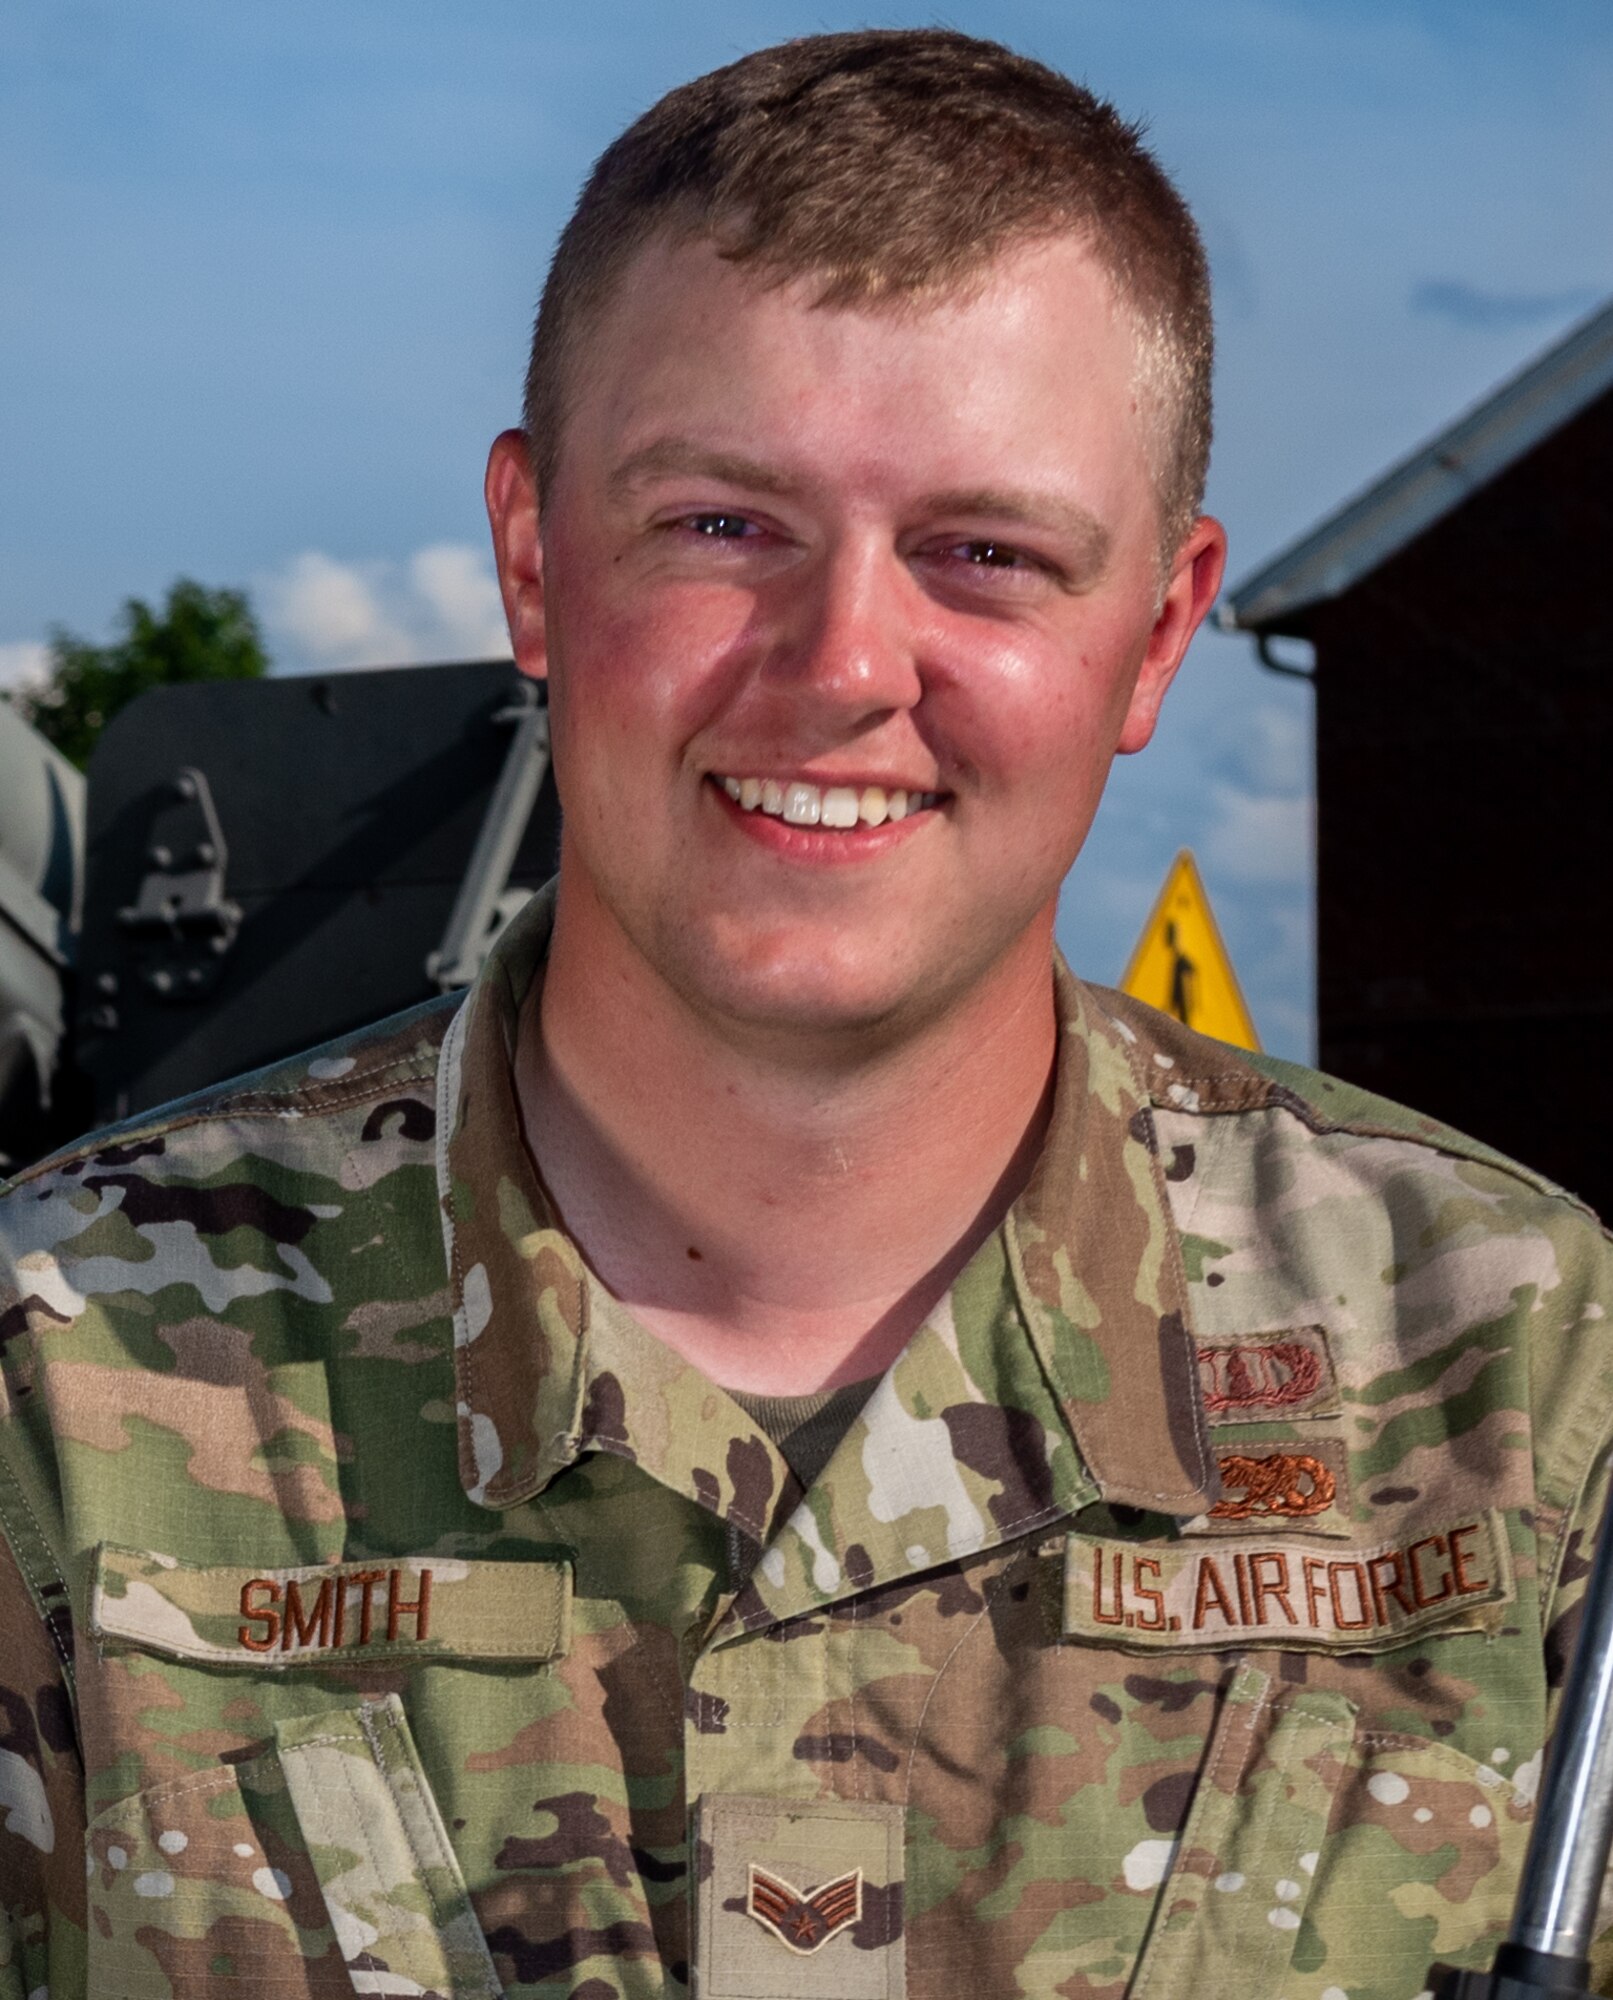 Senior Airman Caleb Smith, a munitions systems crew chief assigned to the 509th Munitions Squadron at Whiteman Air Force Base, Missouri, poses for a photo during the Civilian Marksmanship Program National Matches on July 30, 2019, at Camp Perry, Ohio. Senior Airman Caleb Smith recently performed life-saving first aid on a choking passenger while on an American Airlines flight. (U.S. Air Force photo by Senior Airman Thomas Barley)